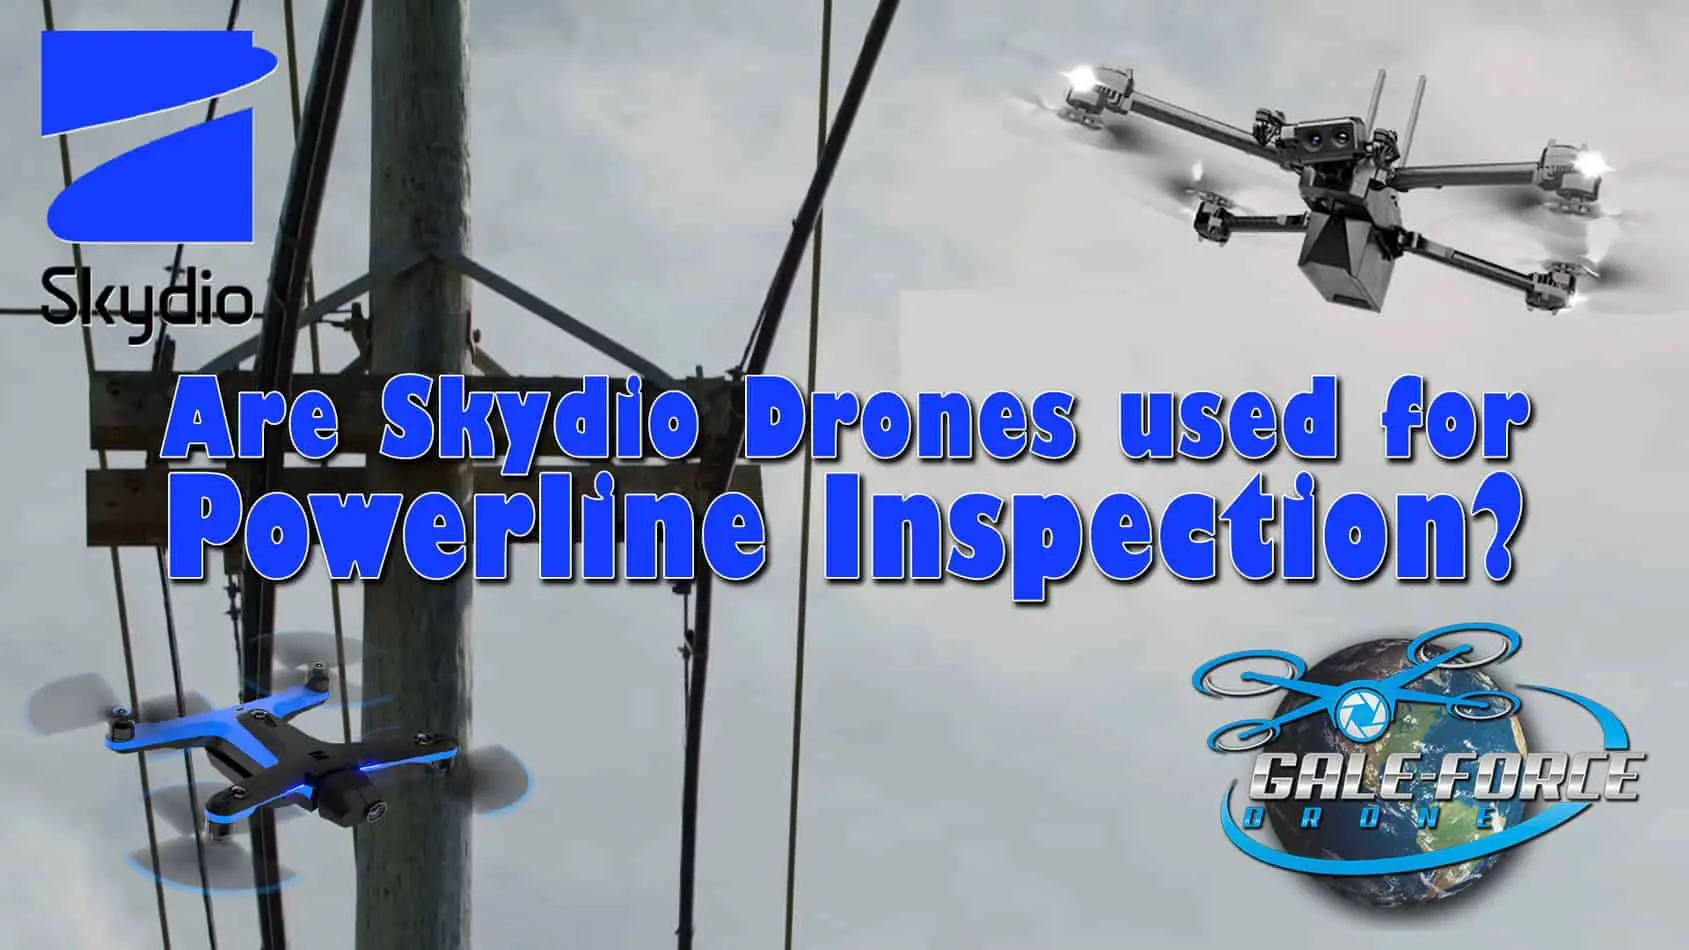 Can Skydio Drones be used for Powerline Inspections?